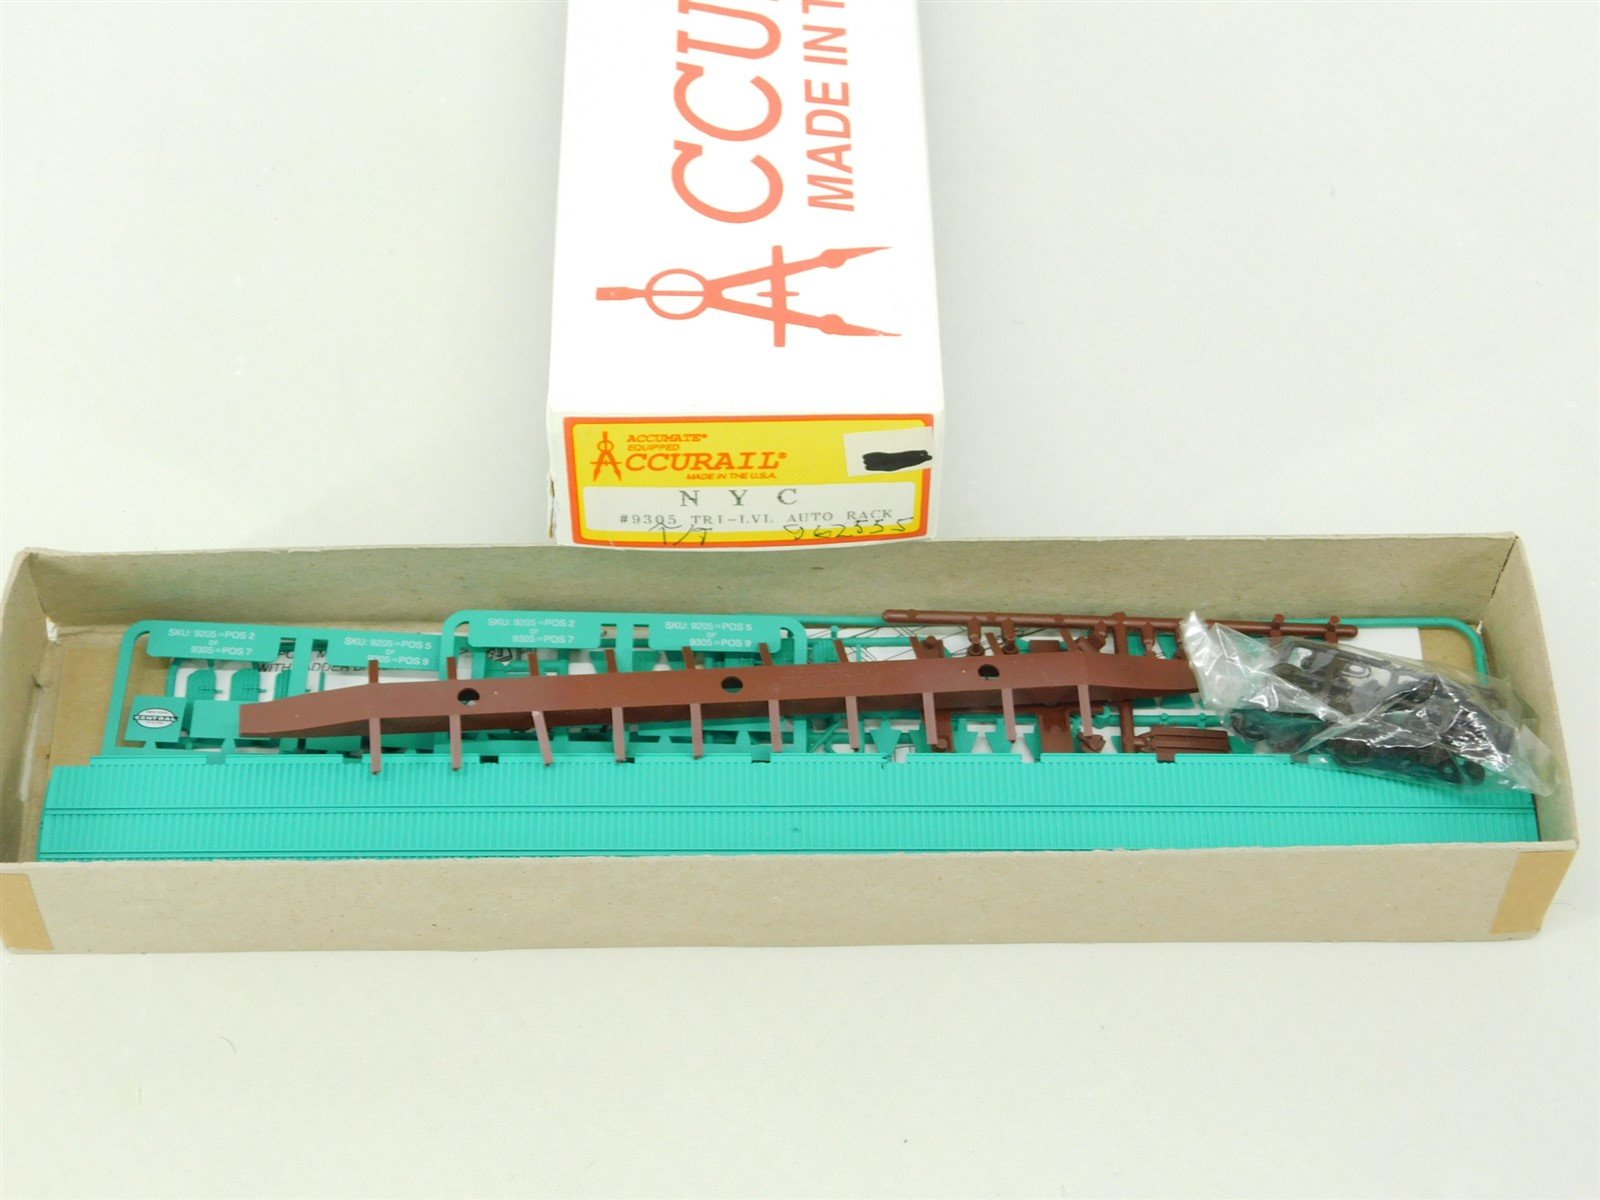 HO Scale Accurail Kit 9305 NYC New York Central Tri-Level Auto Rack Car #962555